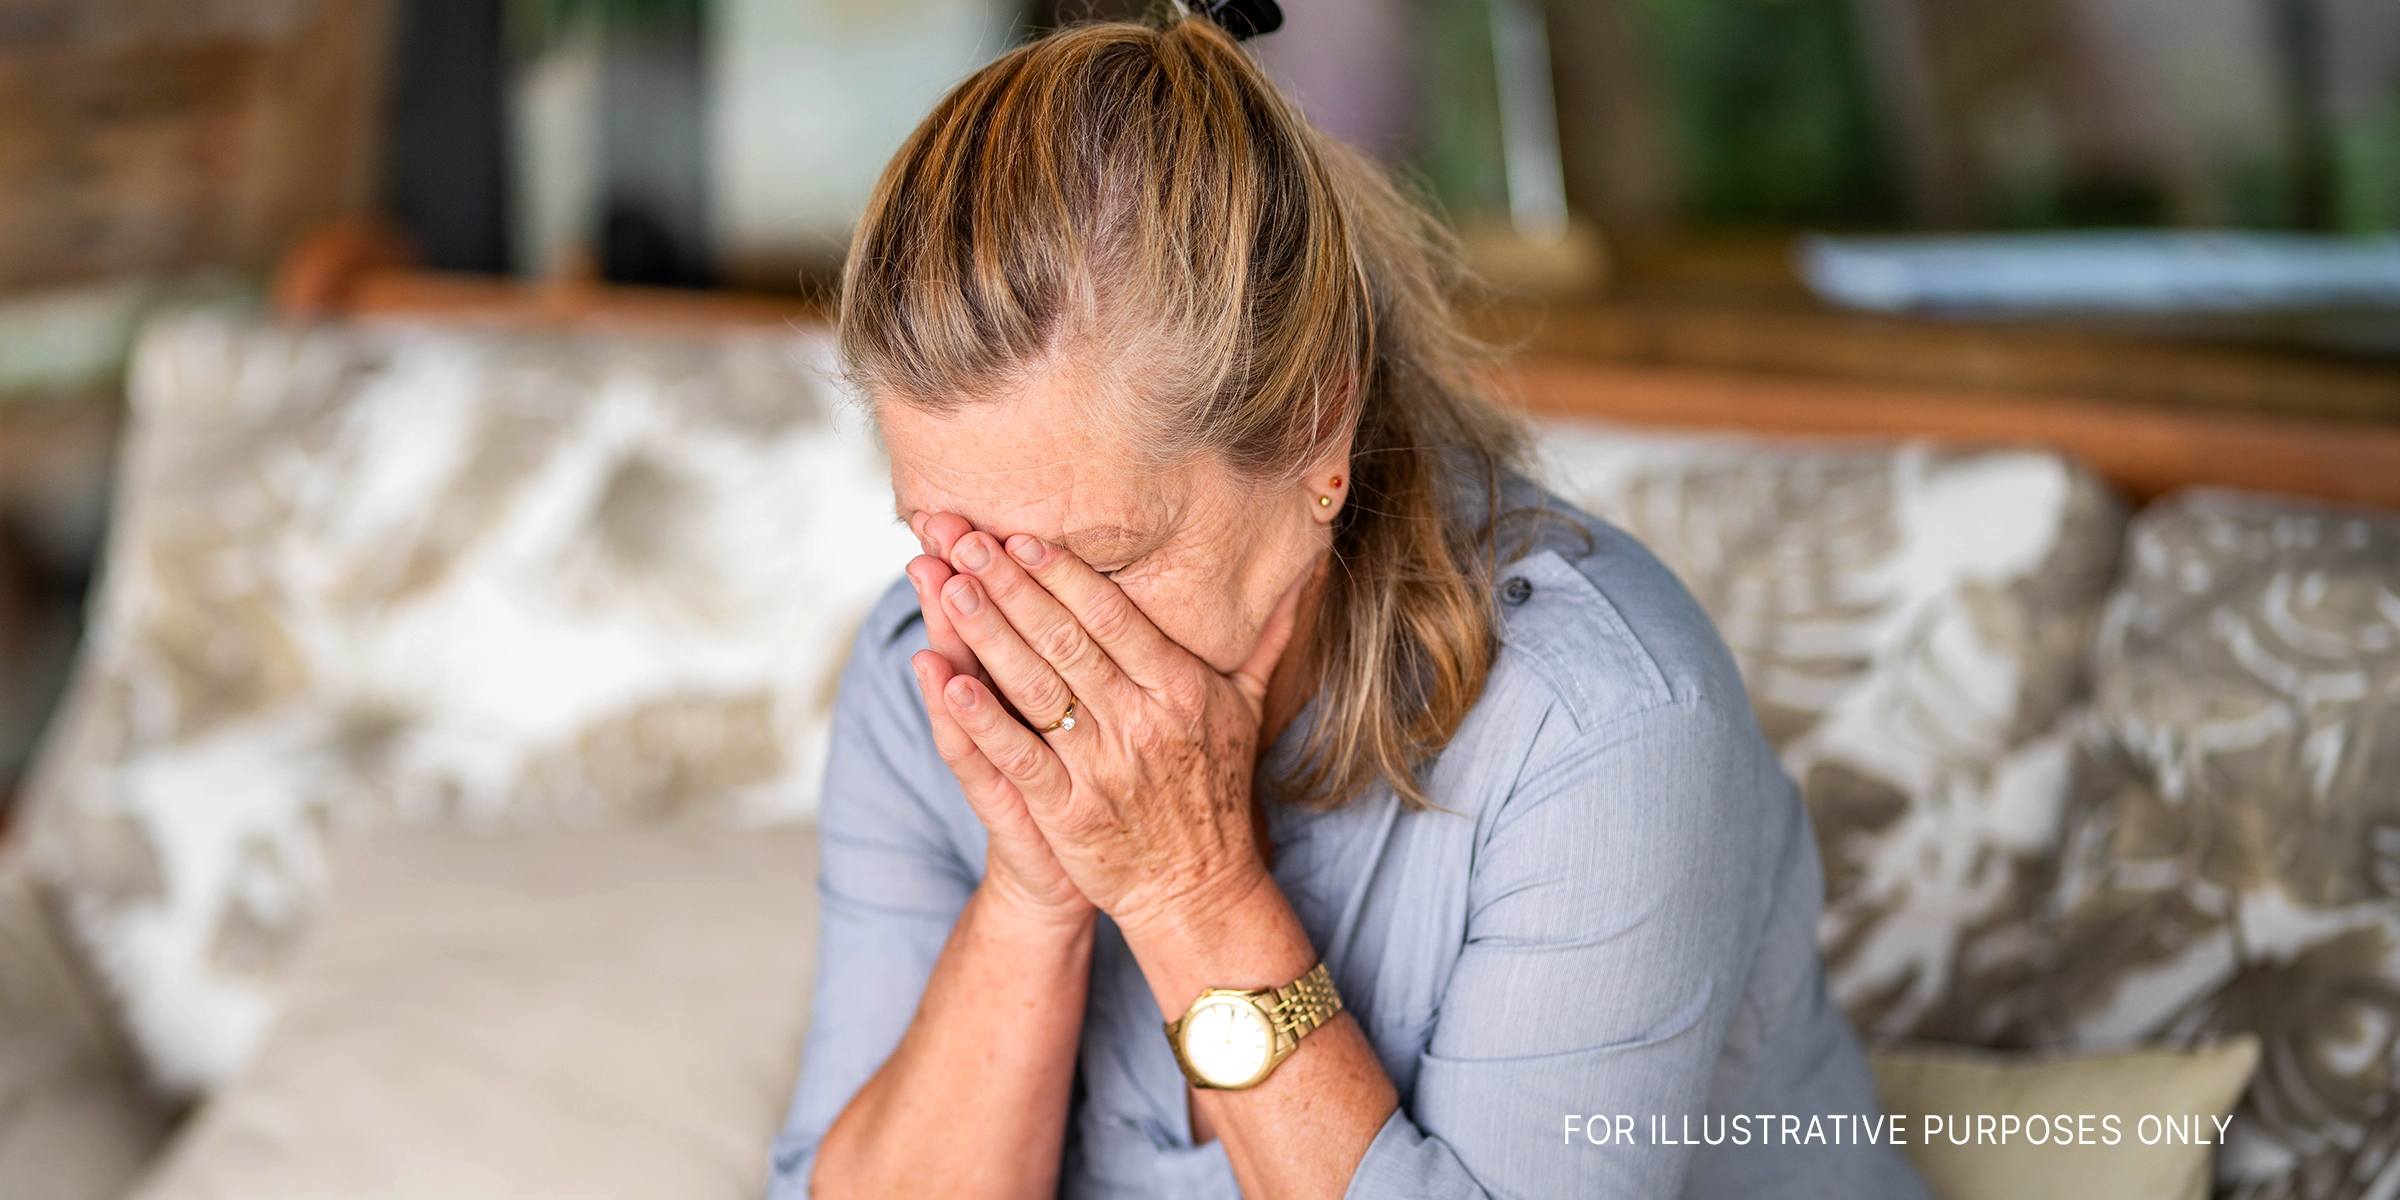 An upset mother-in-law | Source: Getty Images